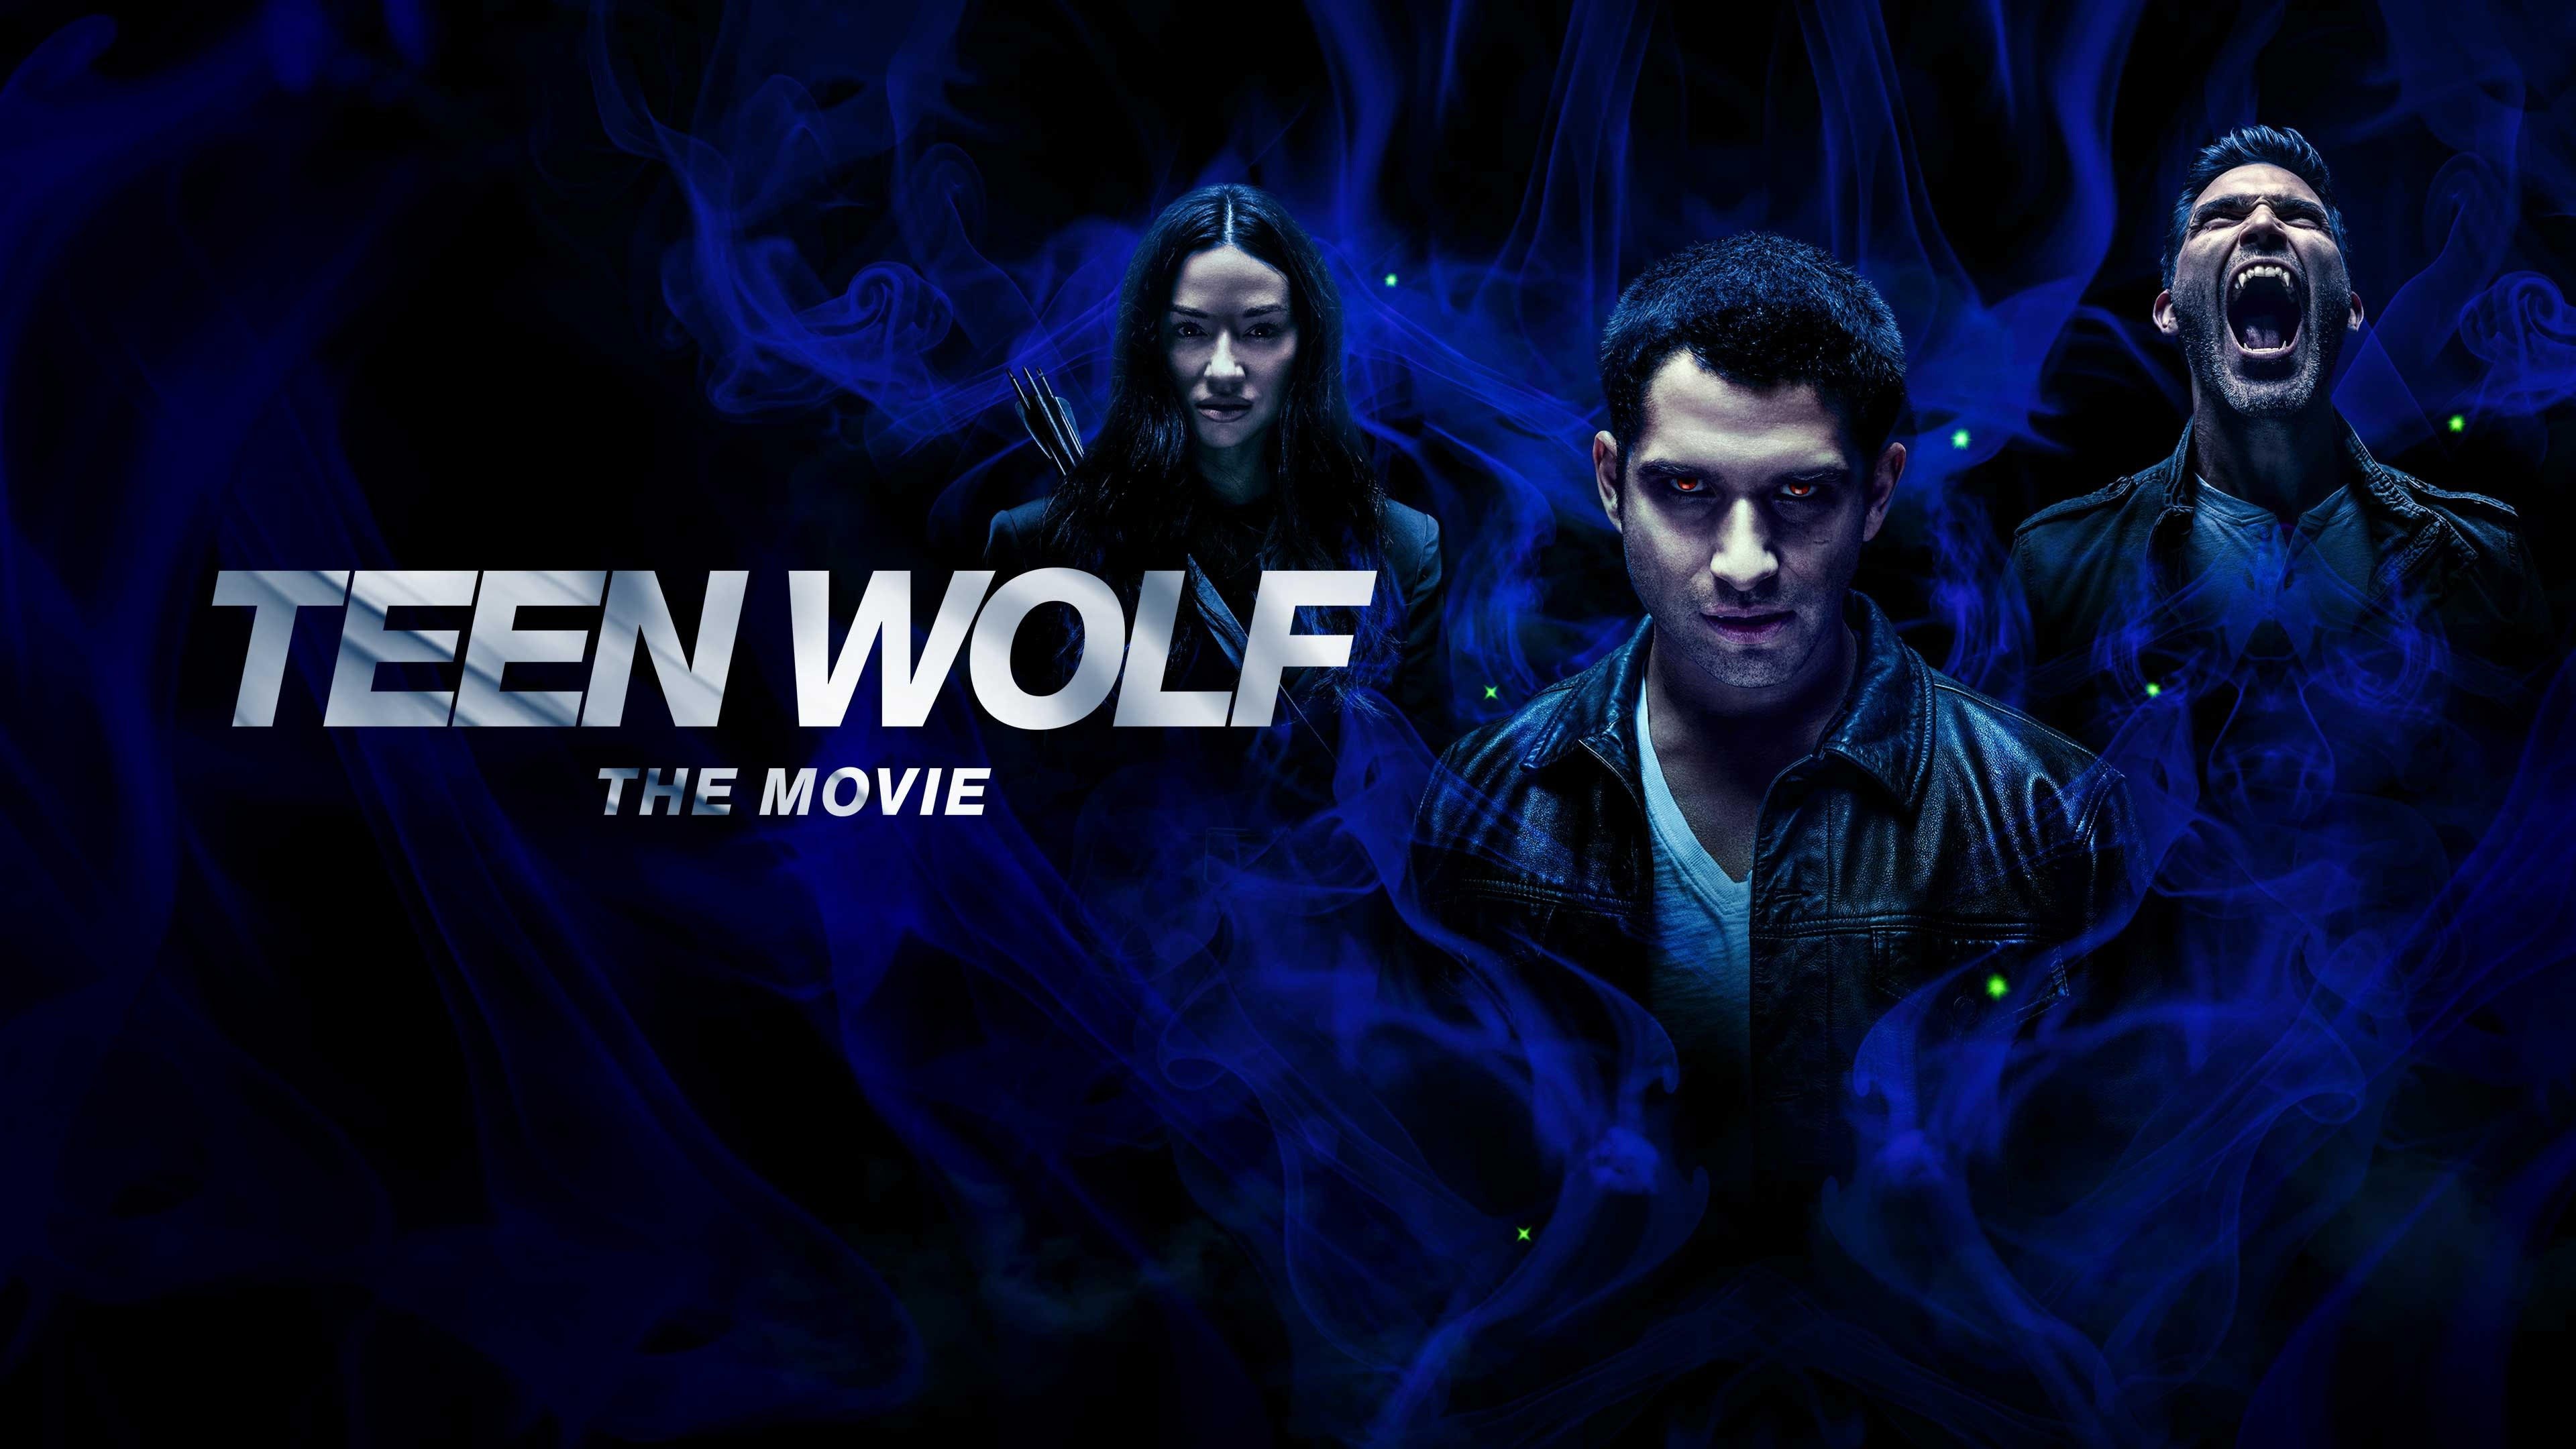 Teen Wolf The Movie ComicCon Teaser Trailer Trailers & Videos